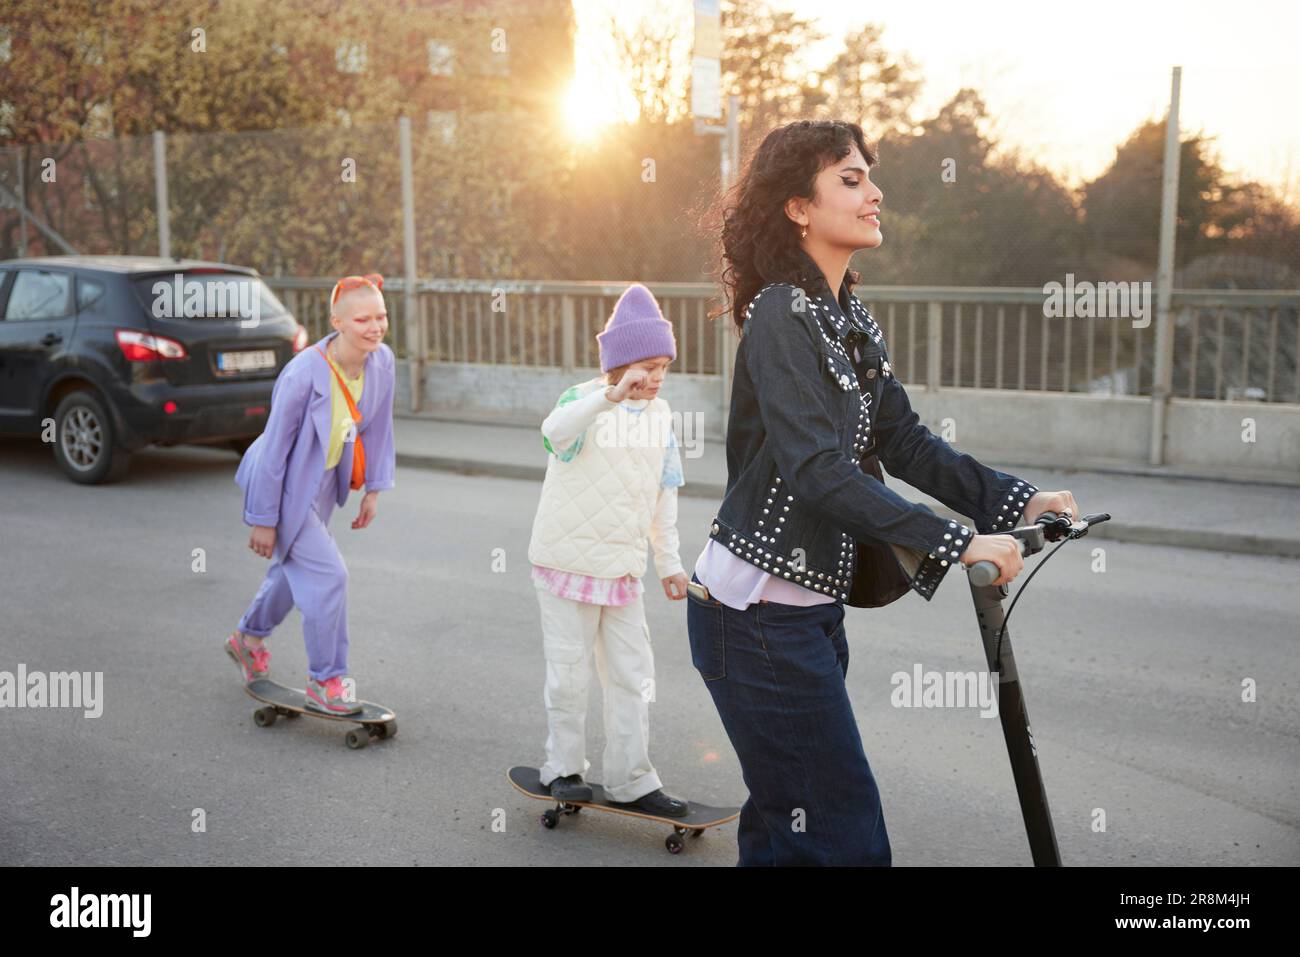 Young women and boy skateboarding together Stock Photo